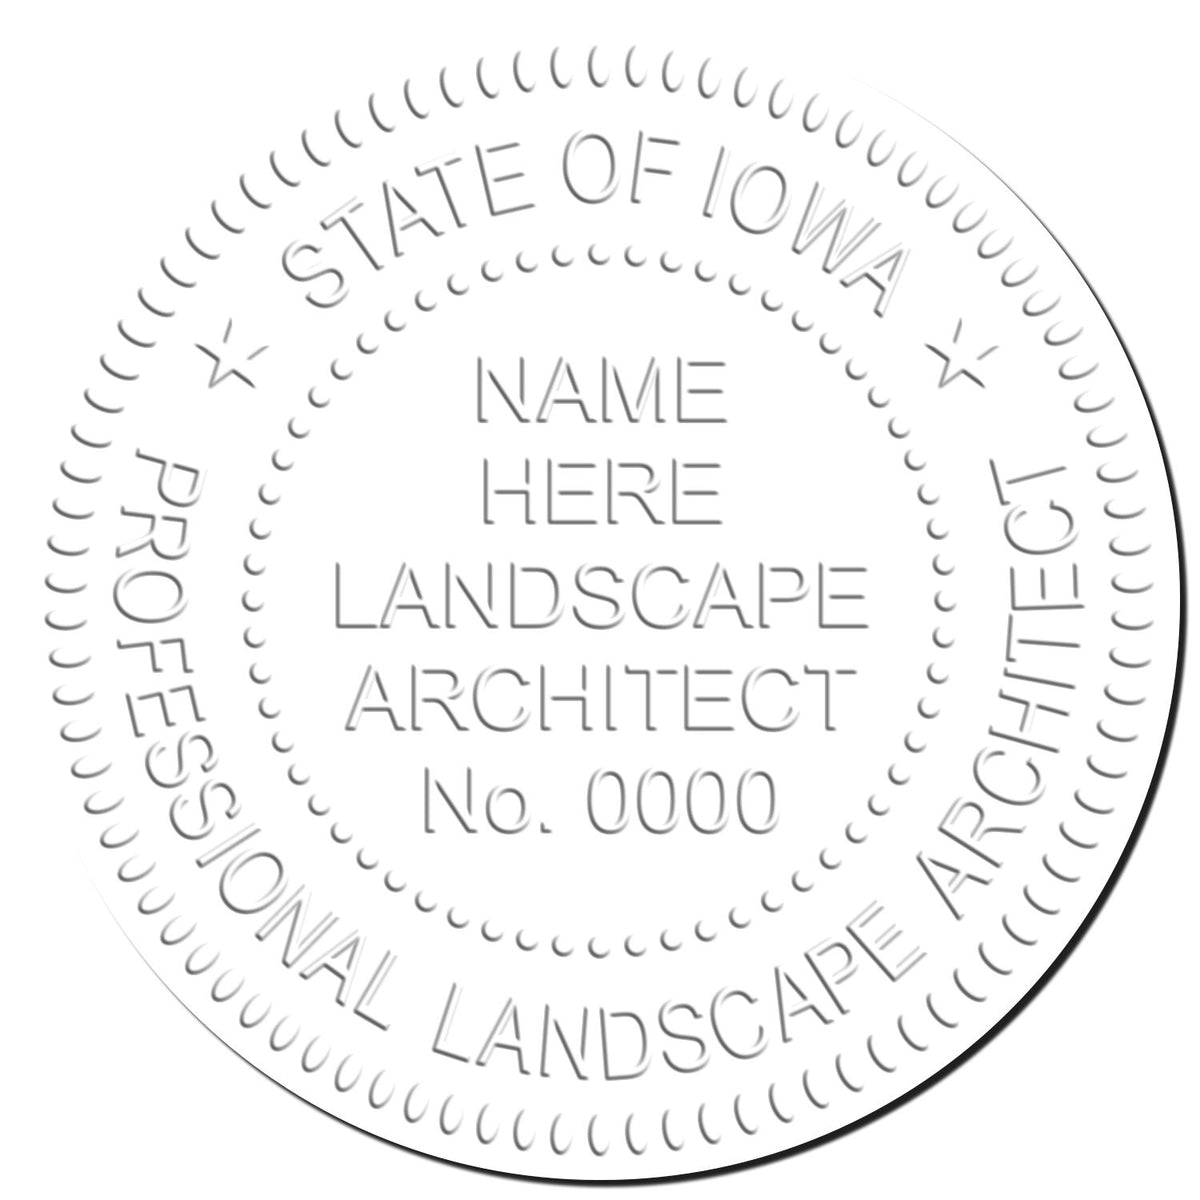 This paper is stamped with a sample imprint of the Gift Iowa Landscape Architect Seal, signifying its quality and reliability.